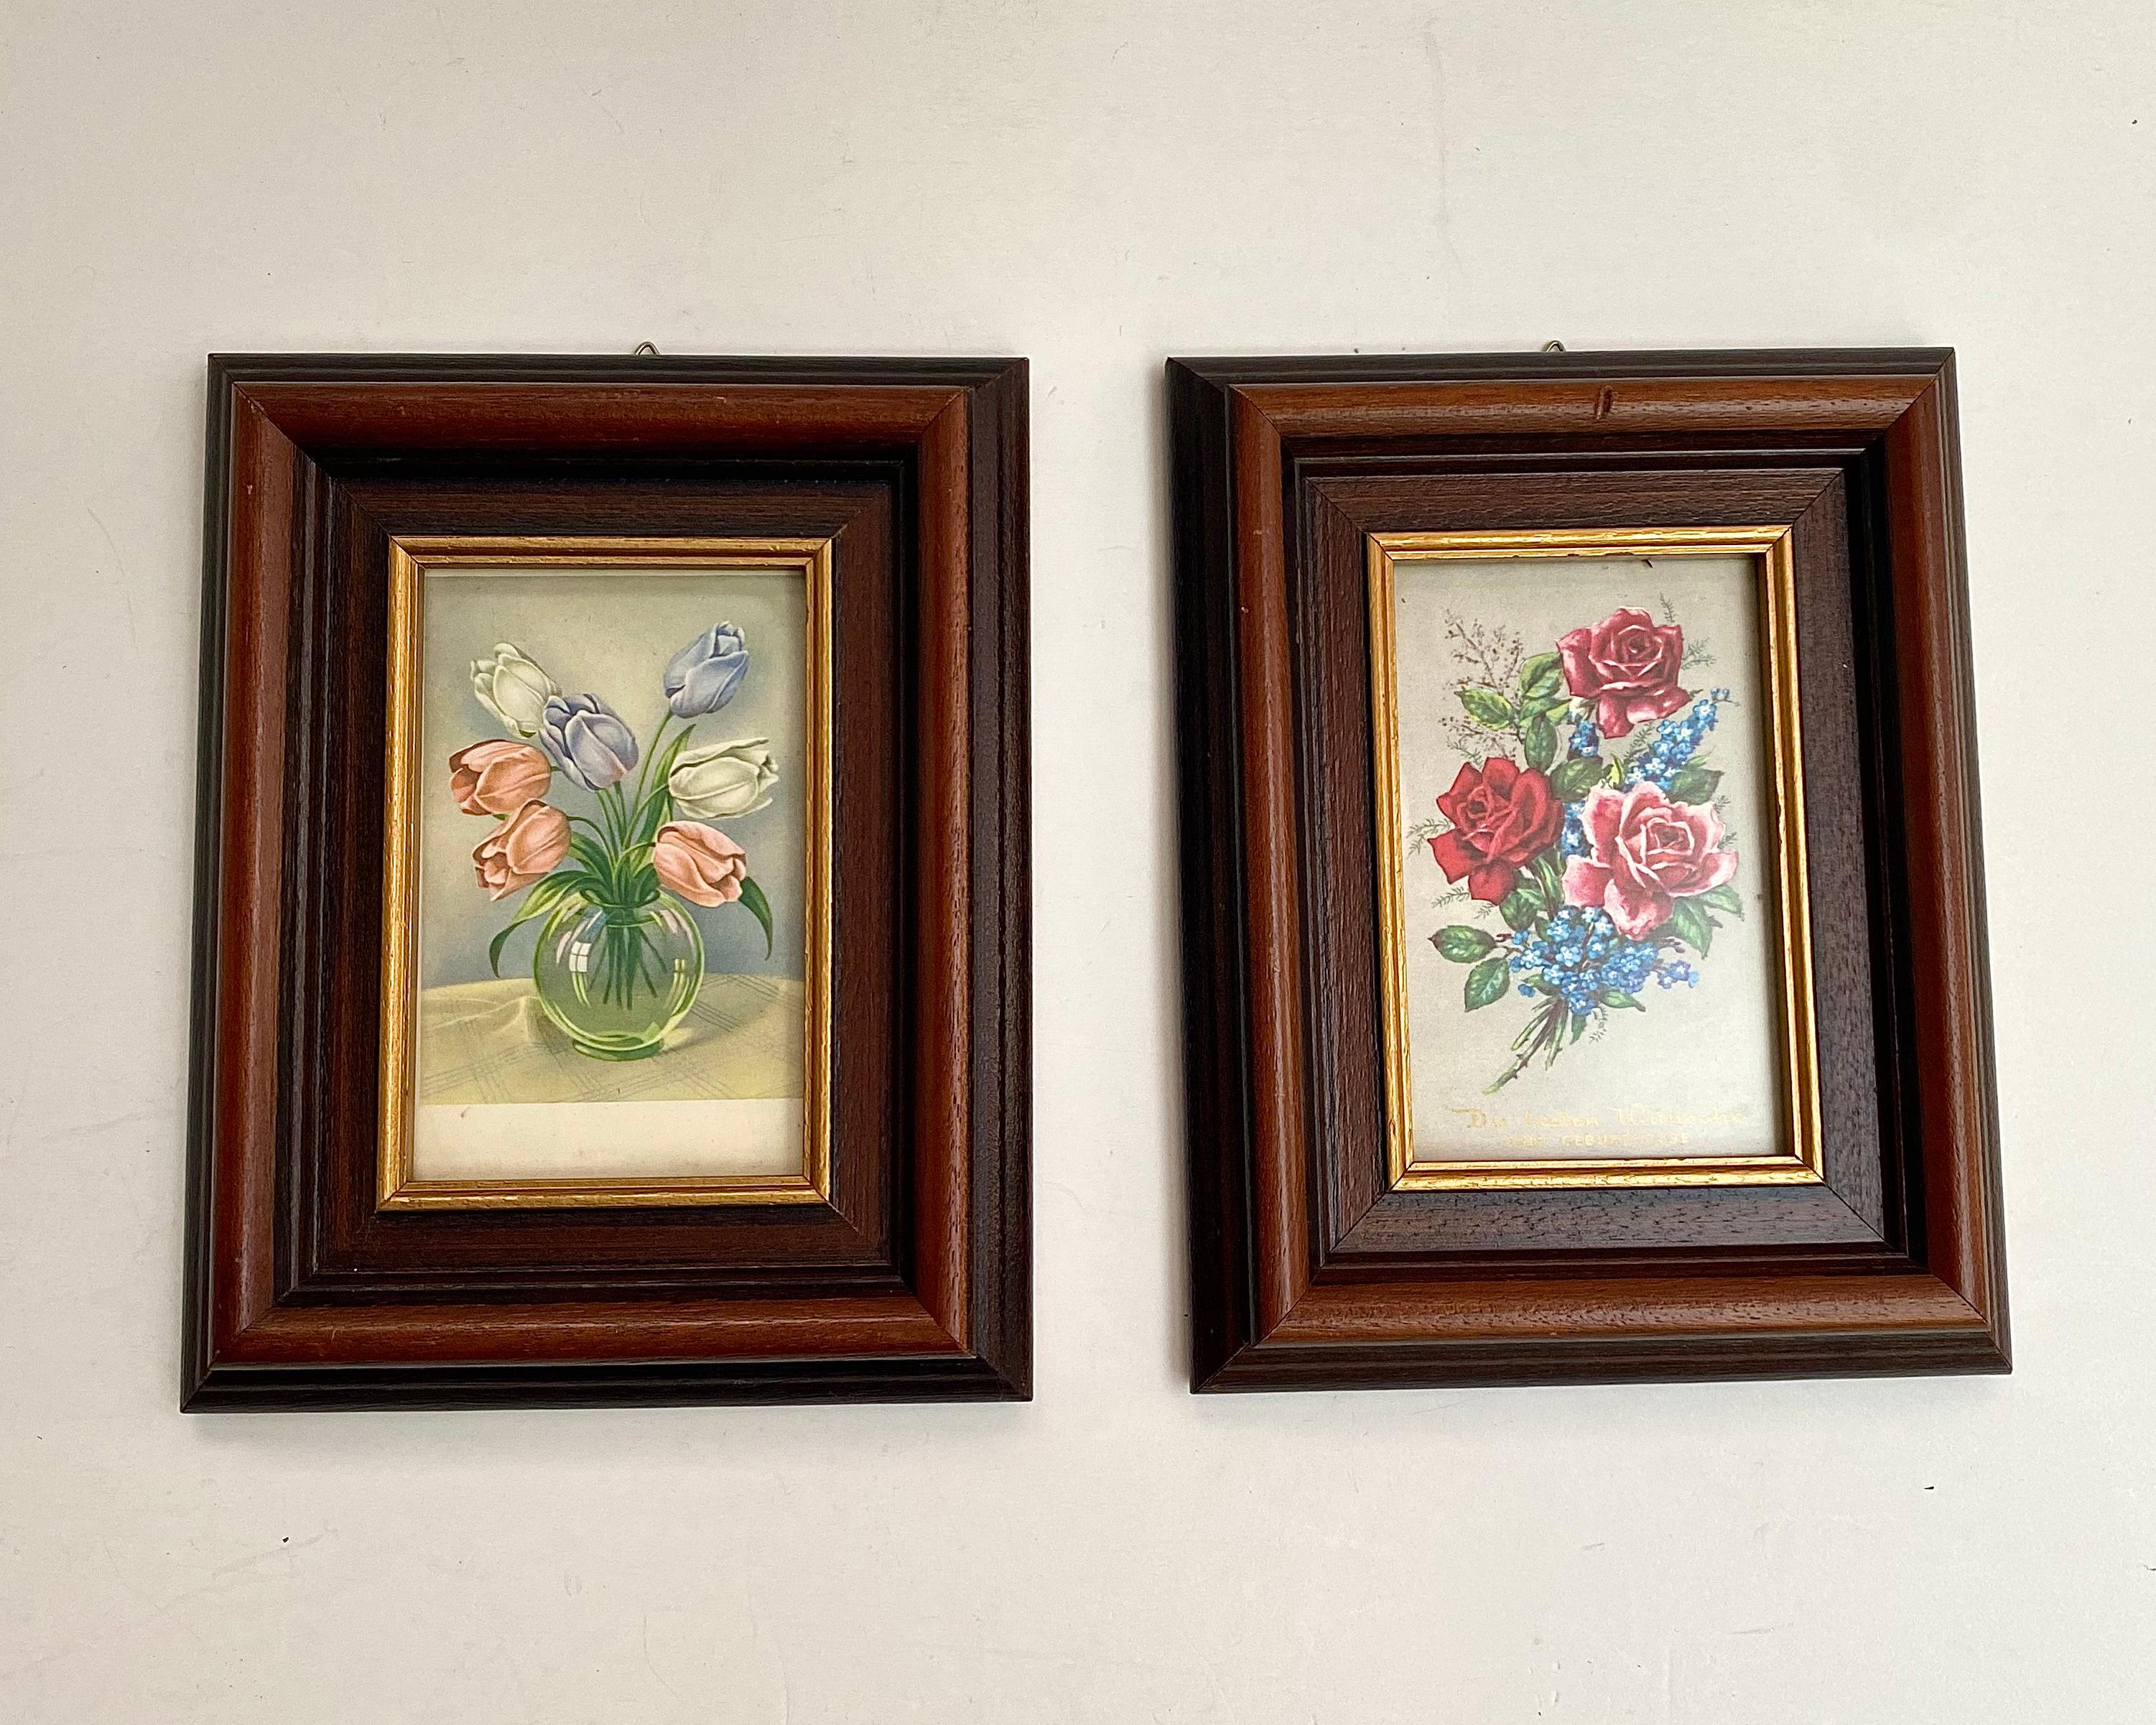 Paired very beautiful framed pictures wall art wall hanging with flowers.

The subject classic red roses, buds, leaves and tulips all in a pleasing vintage gold frames which are  in very good condition, with just a little bit of loss.

The paintings